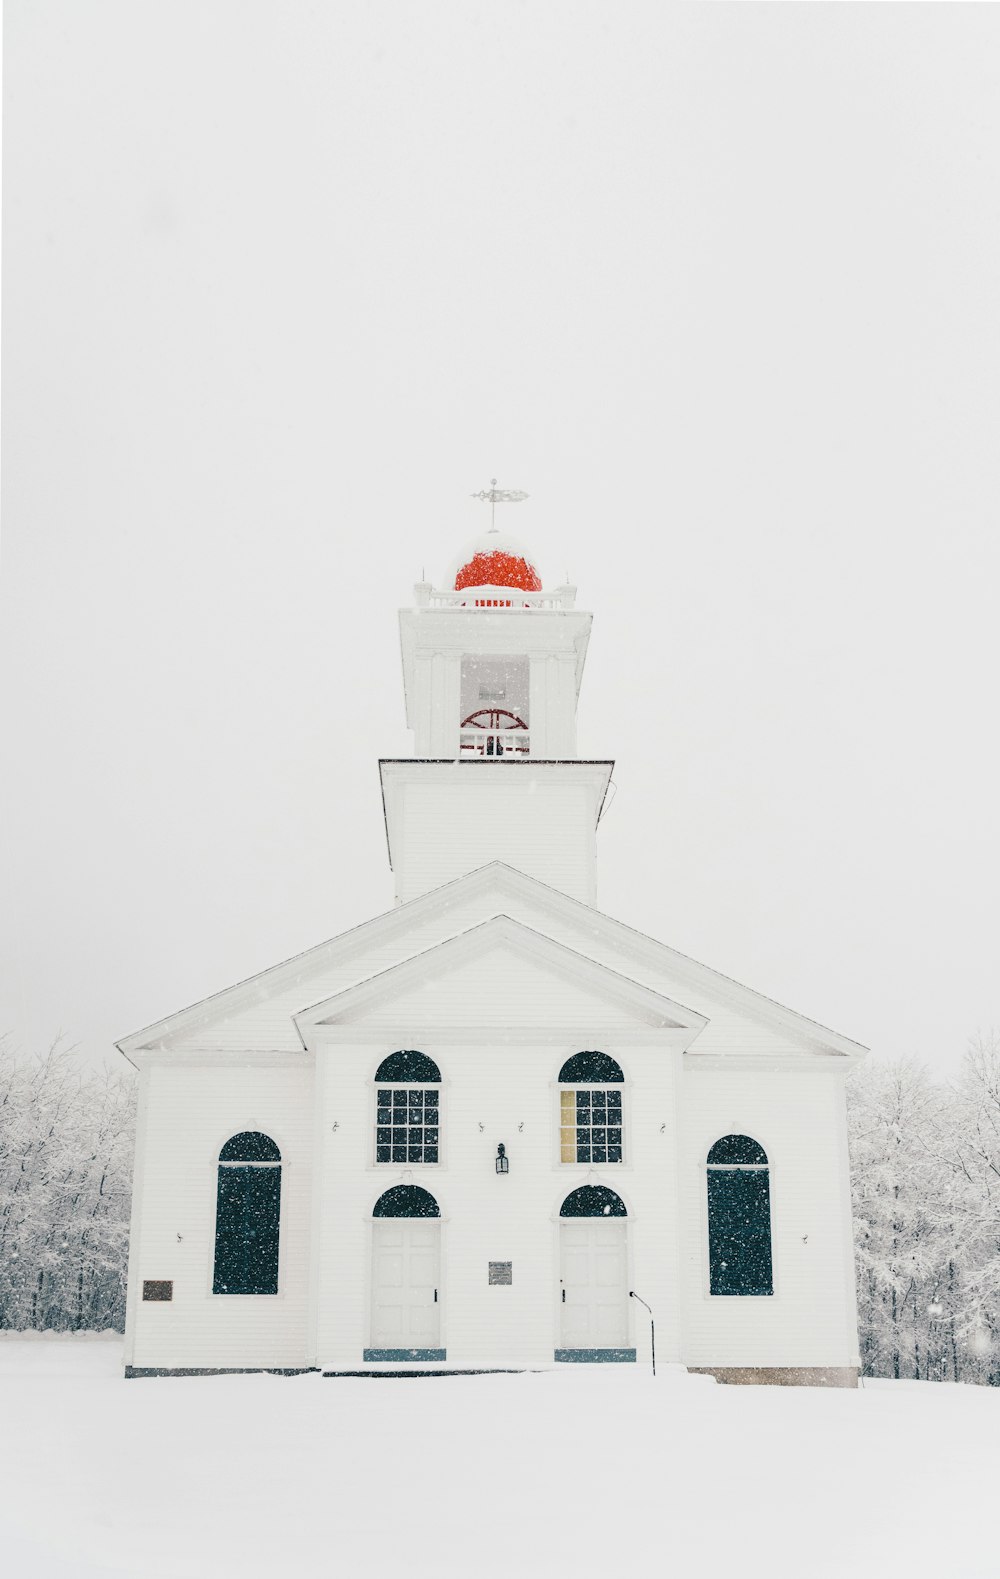 white church surrounded by trees